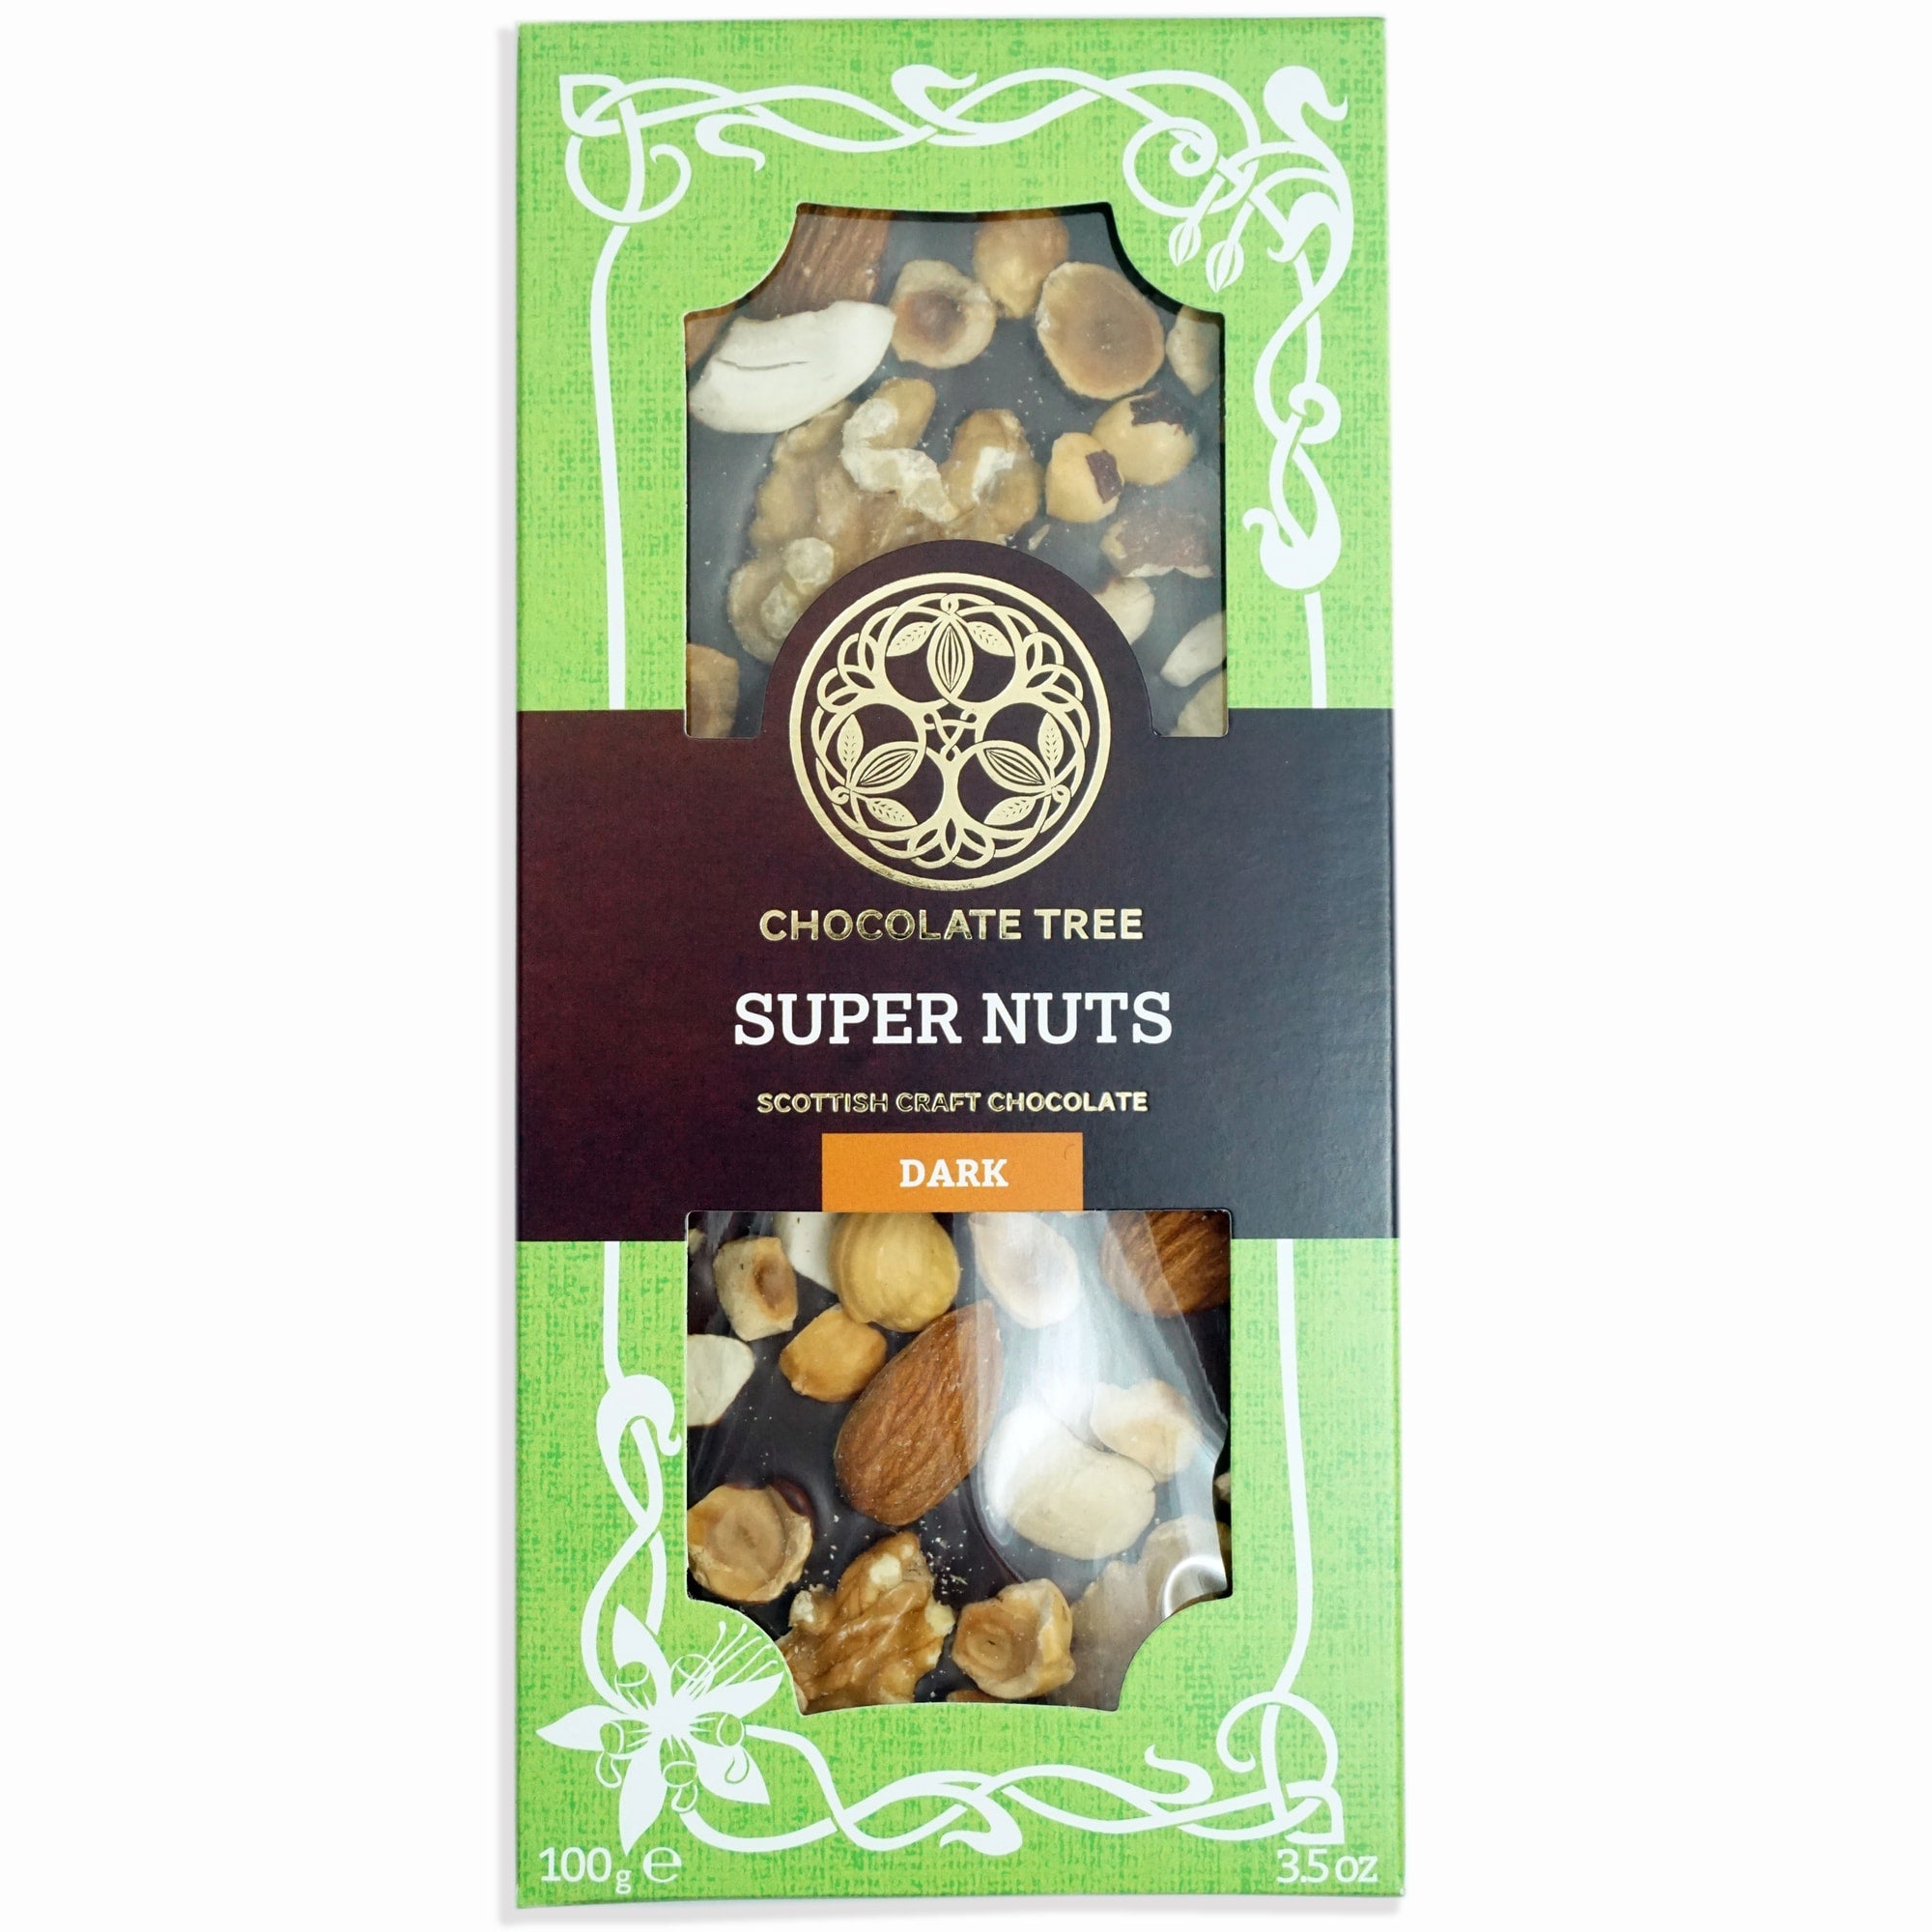 Super Nuts Chocolate by Chocolate Tree